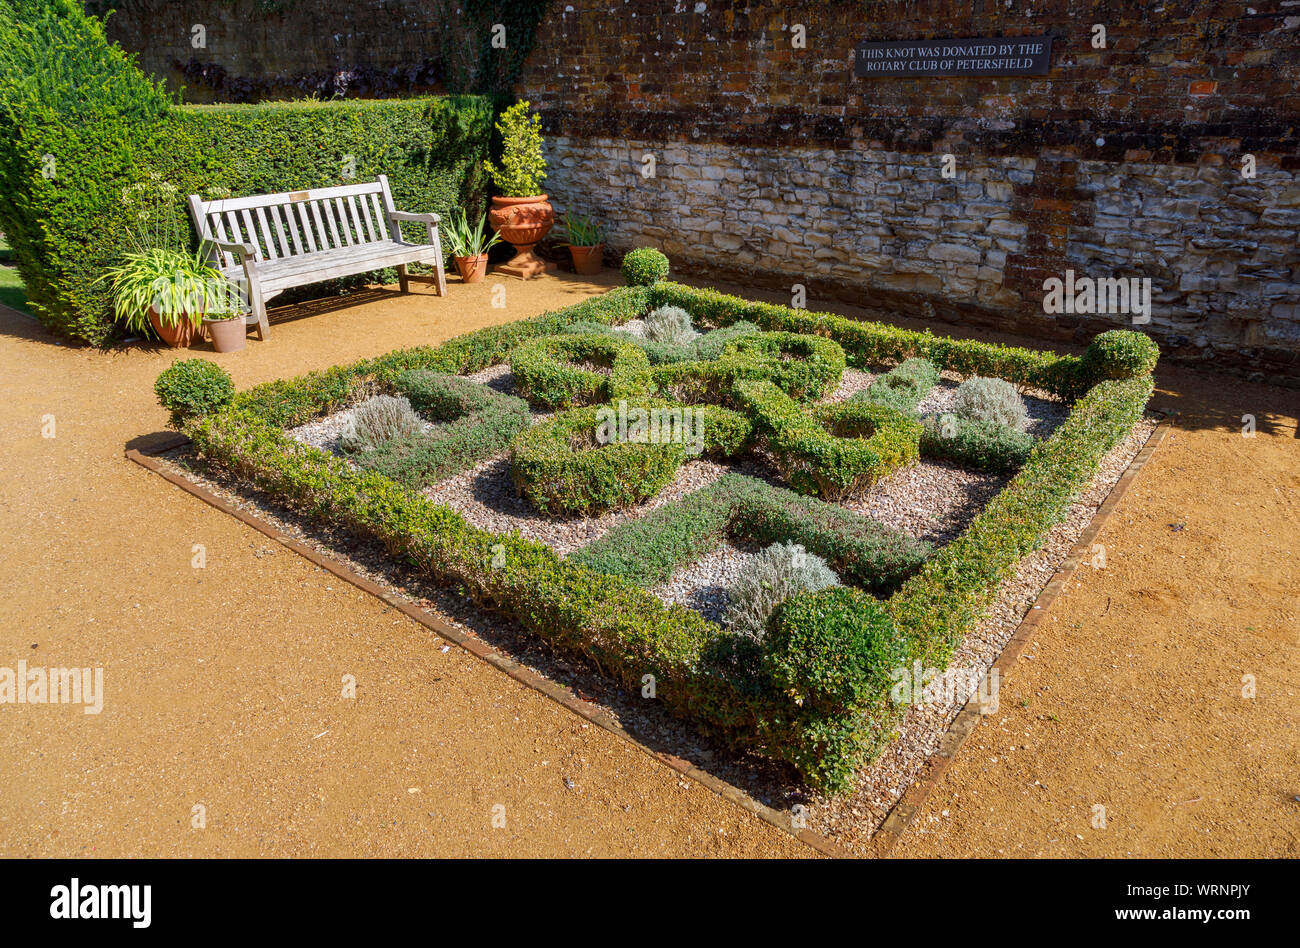 Yew knot garden in the Physic Garden, a botanical herb garden open to the public in the market town of Petersfield, Hampshire, southern England, UK Stock Photo